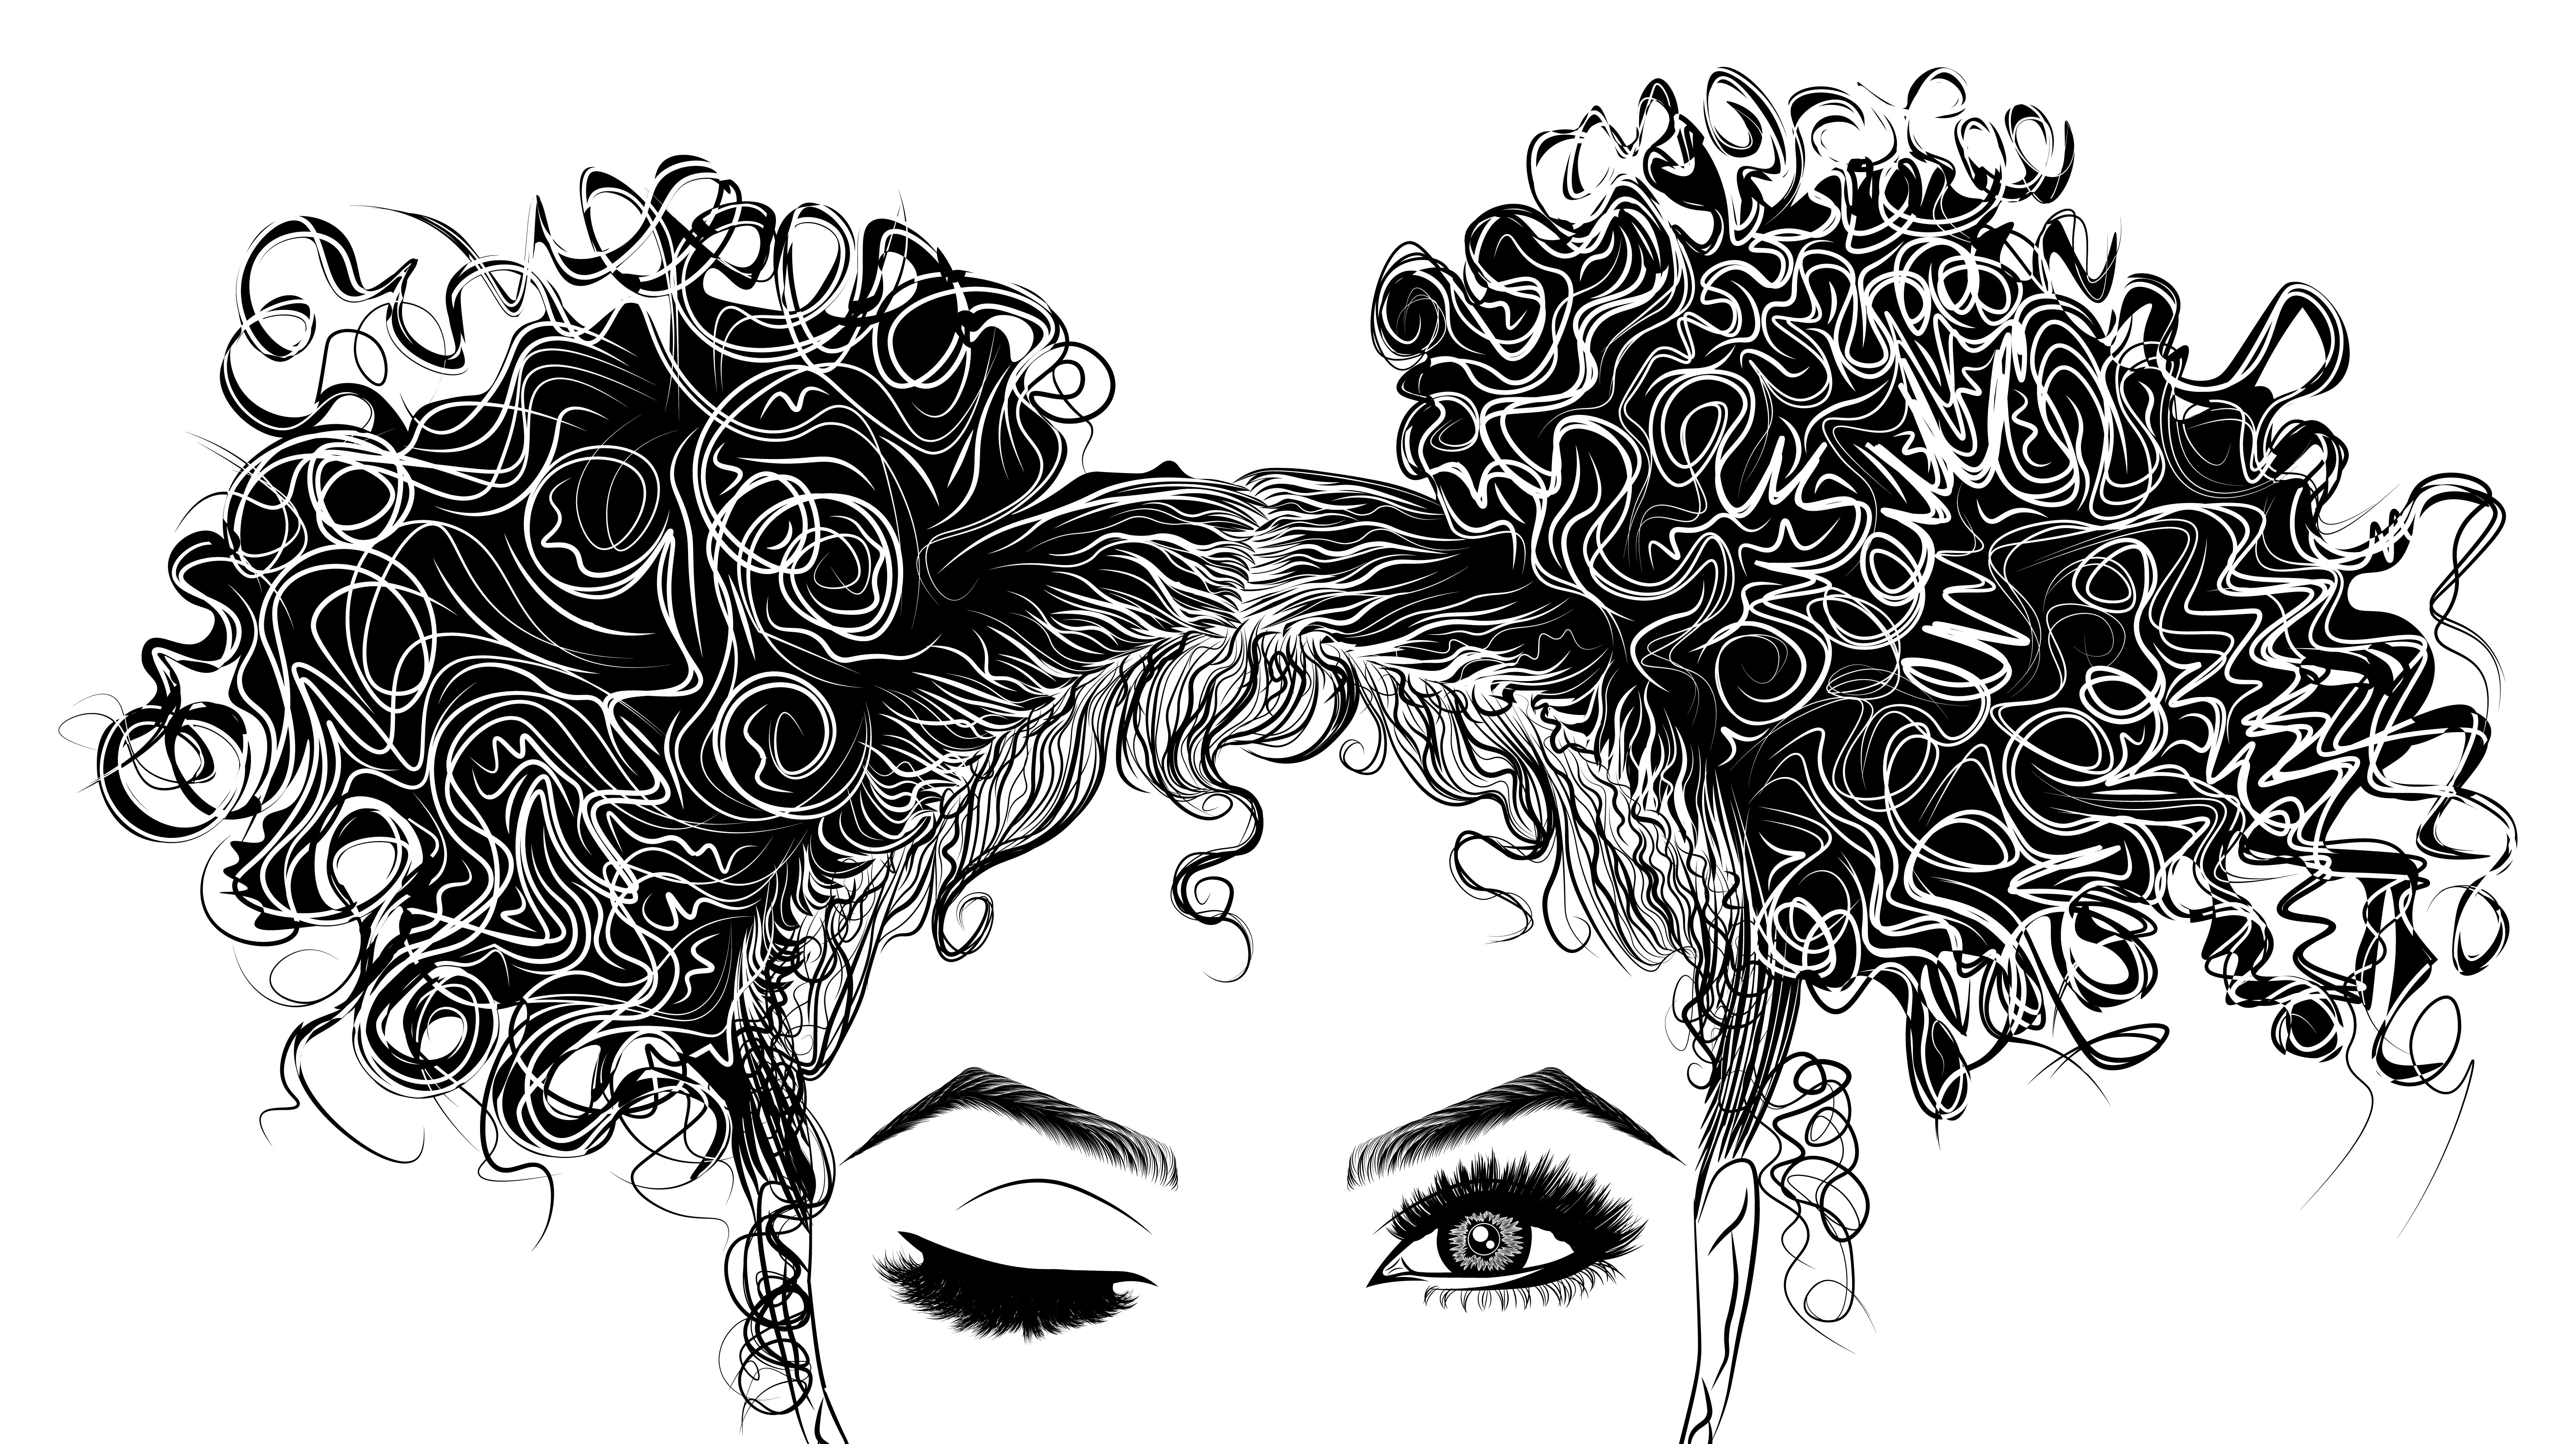 A black and white illustration of a woman with styled curly hair | Source: Shutterstock